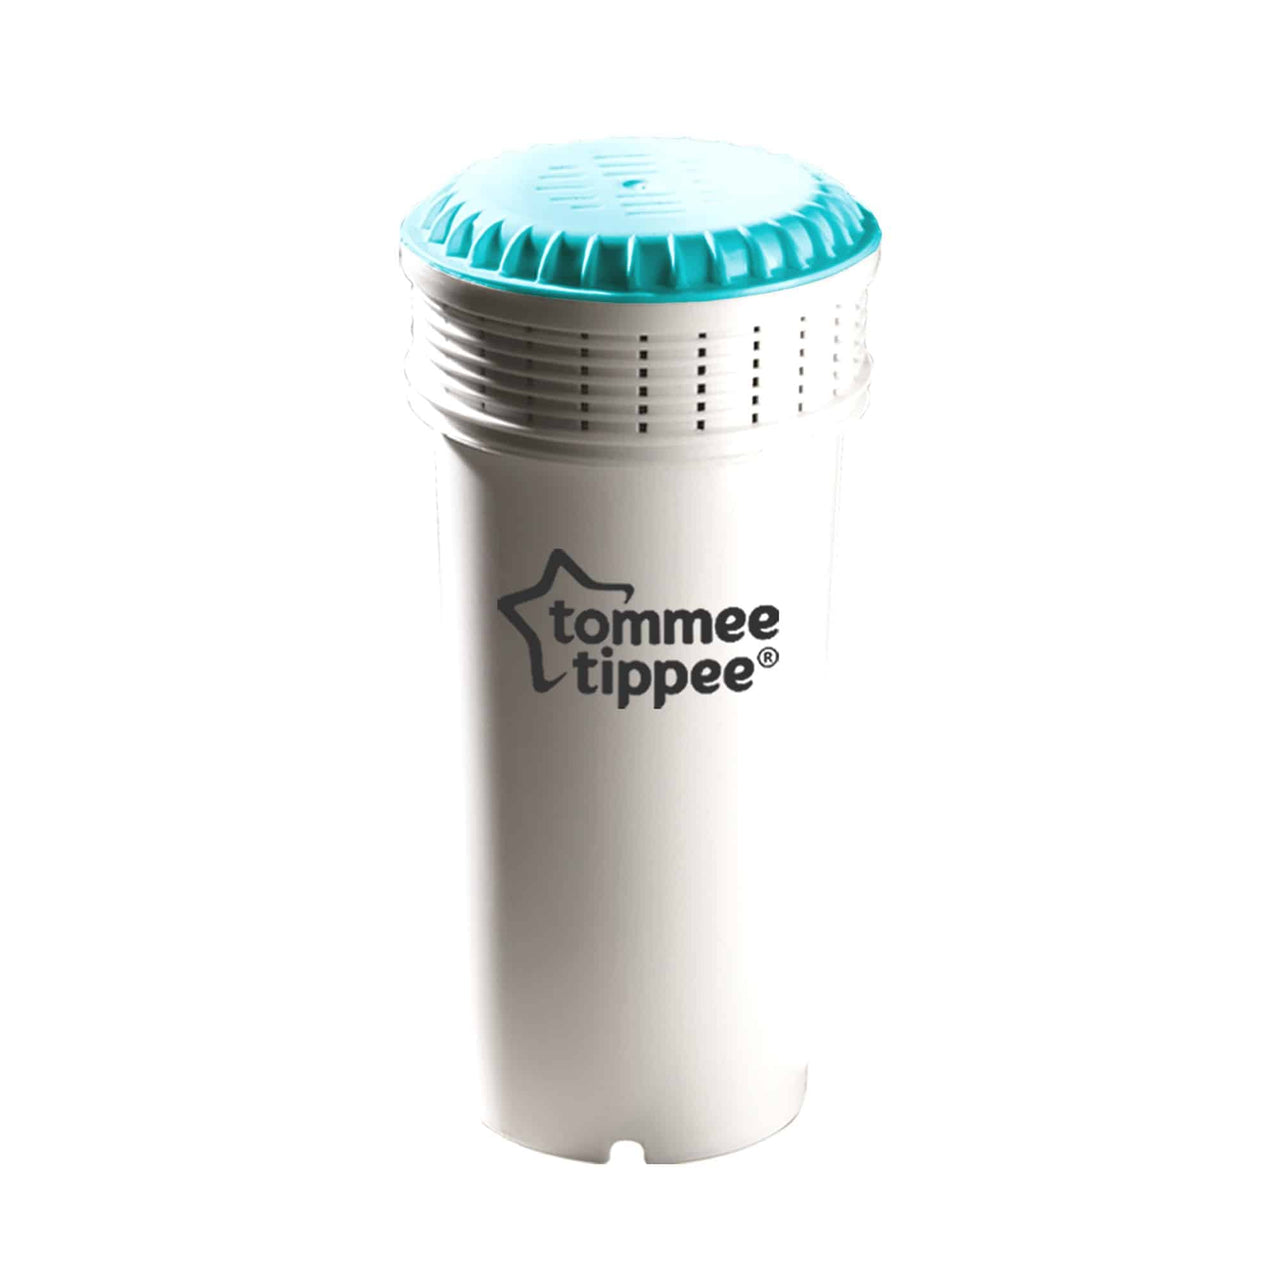 Tommee Tippee Replacement Filter For The Perfect Prep